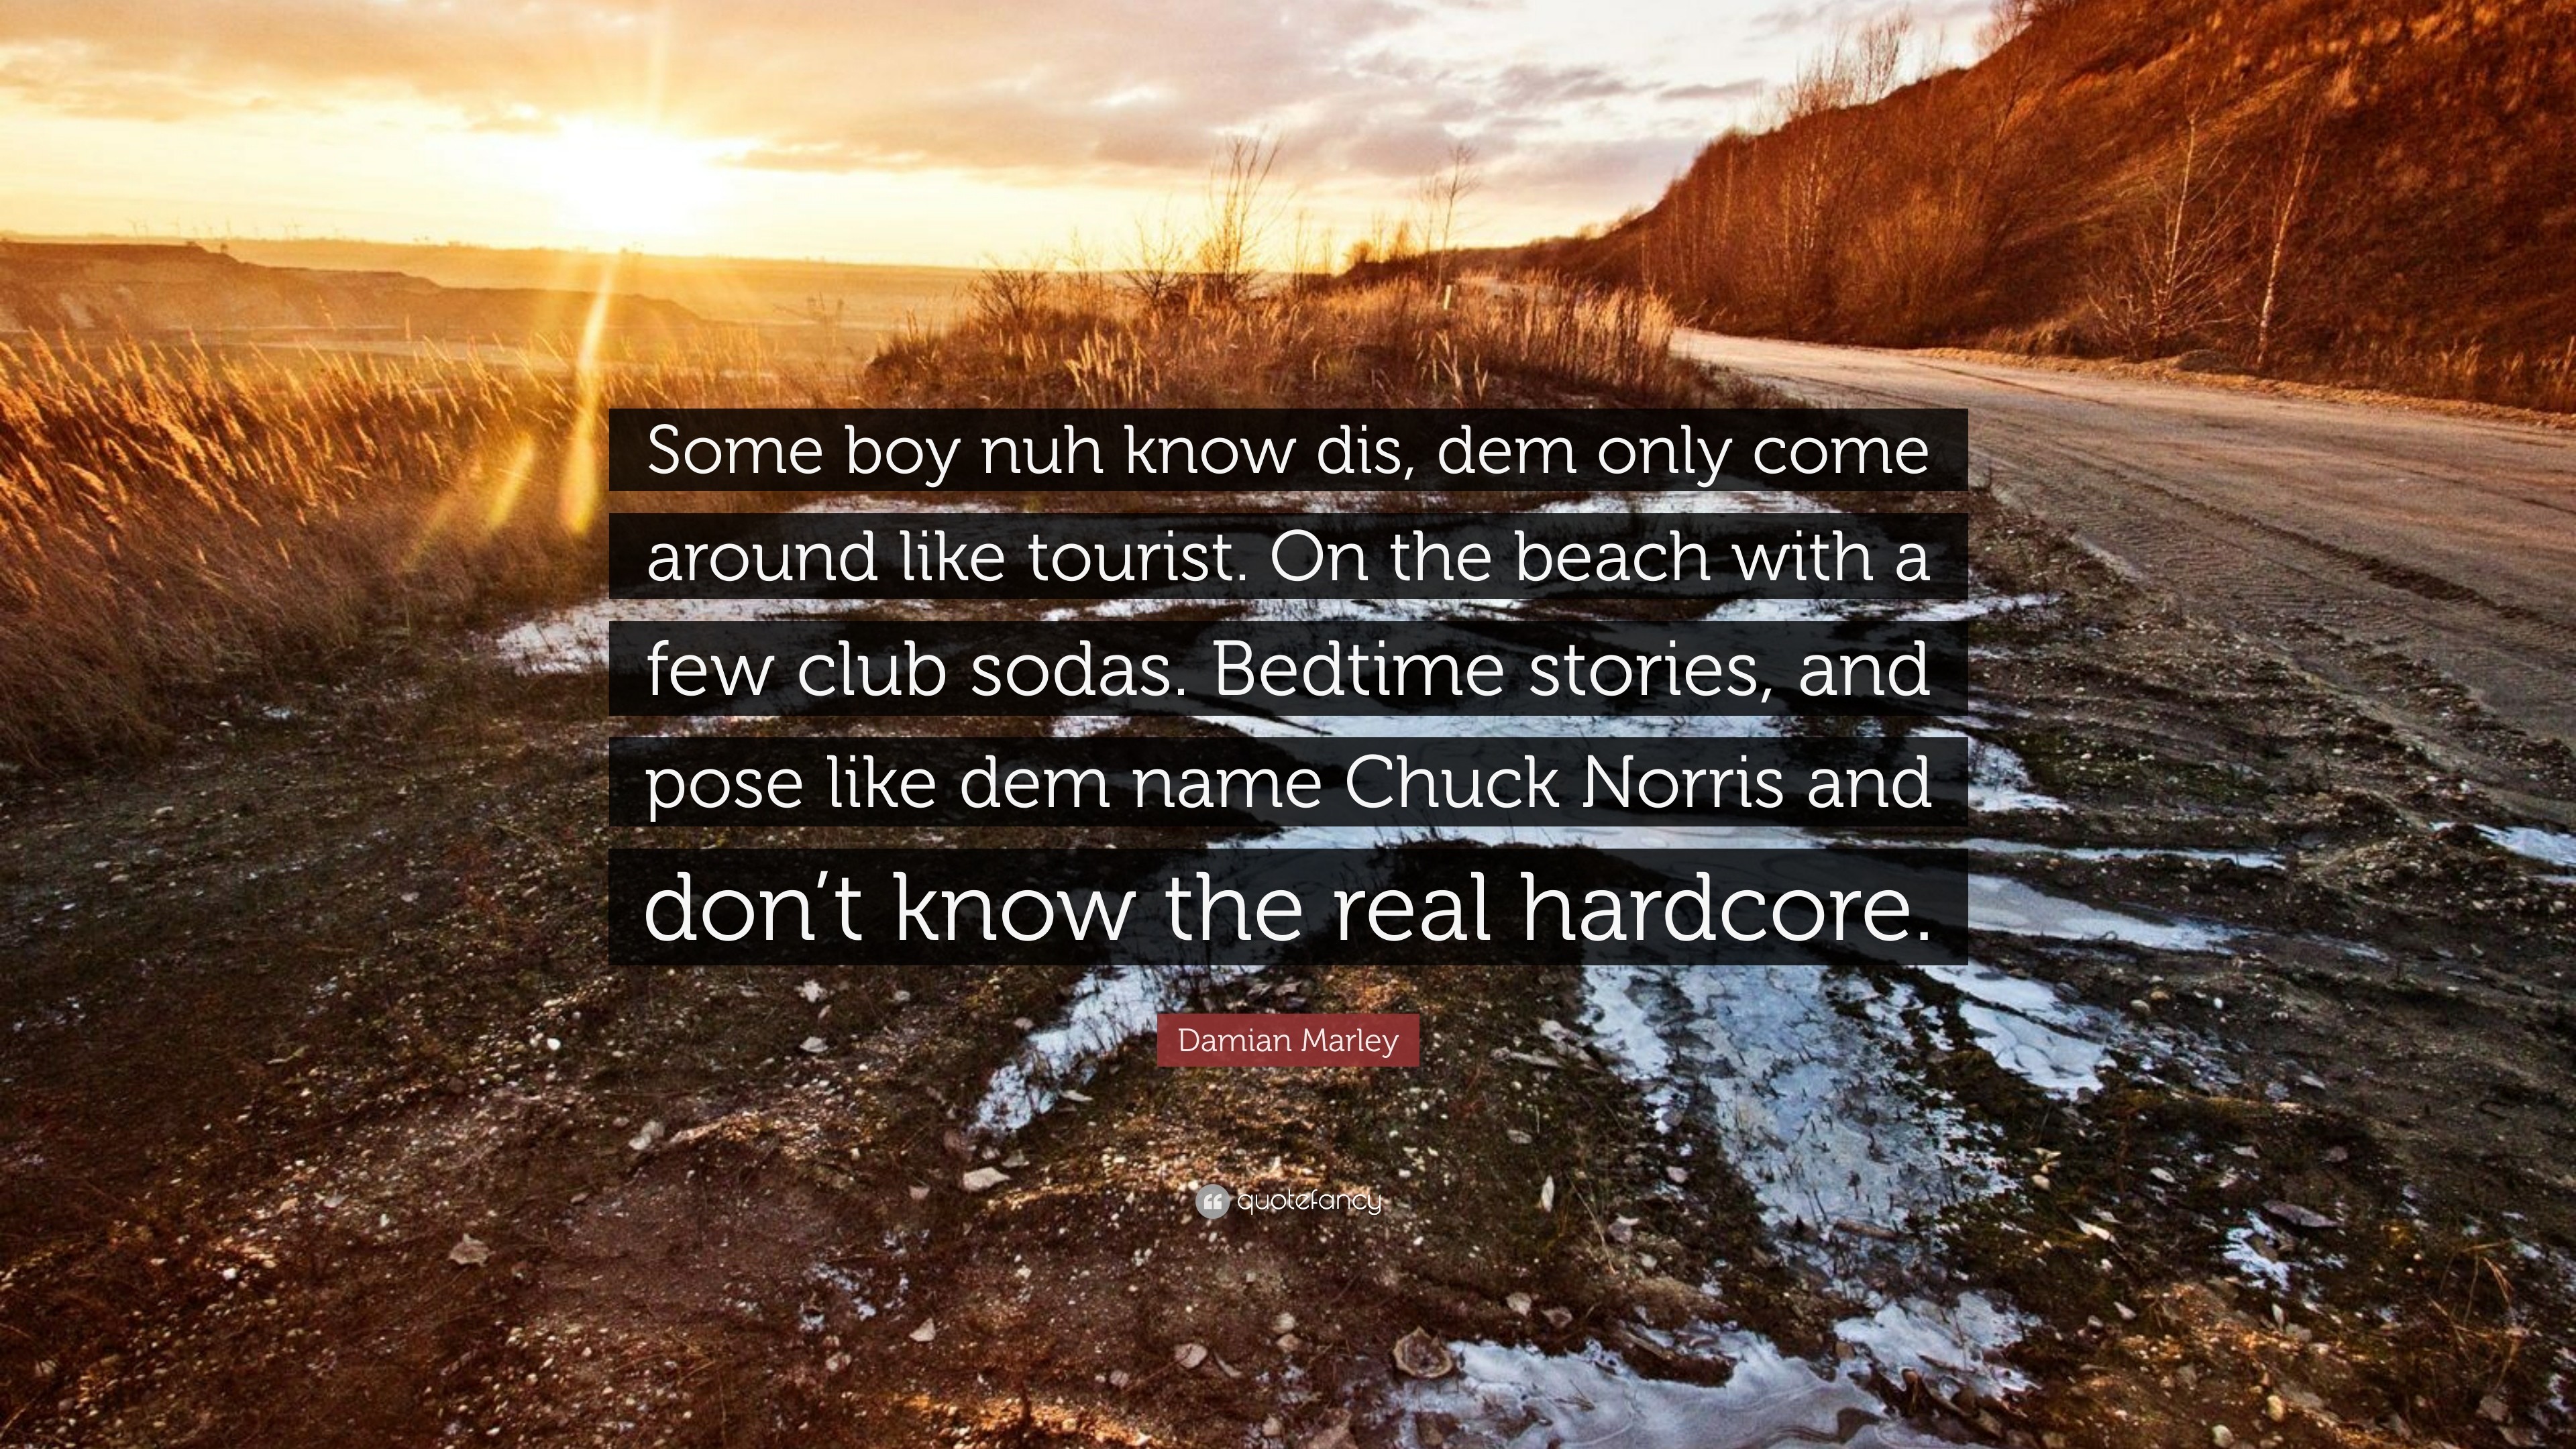 3840x2160 Damian Marley Quote: “Some boy nuh know dis, dem only come around like